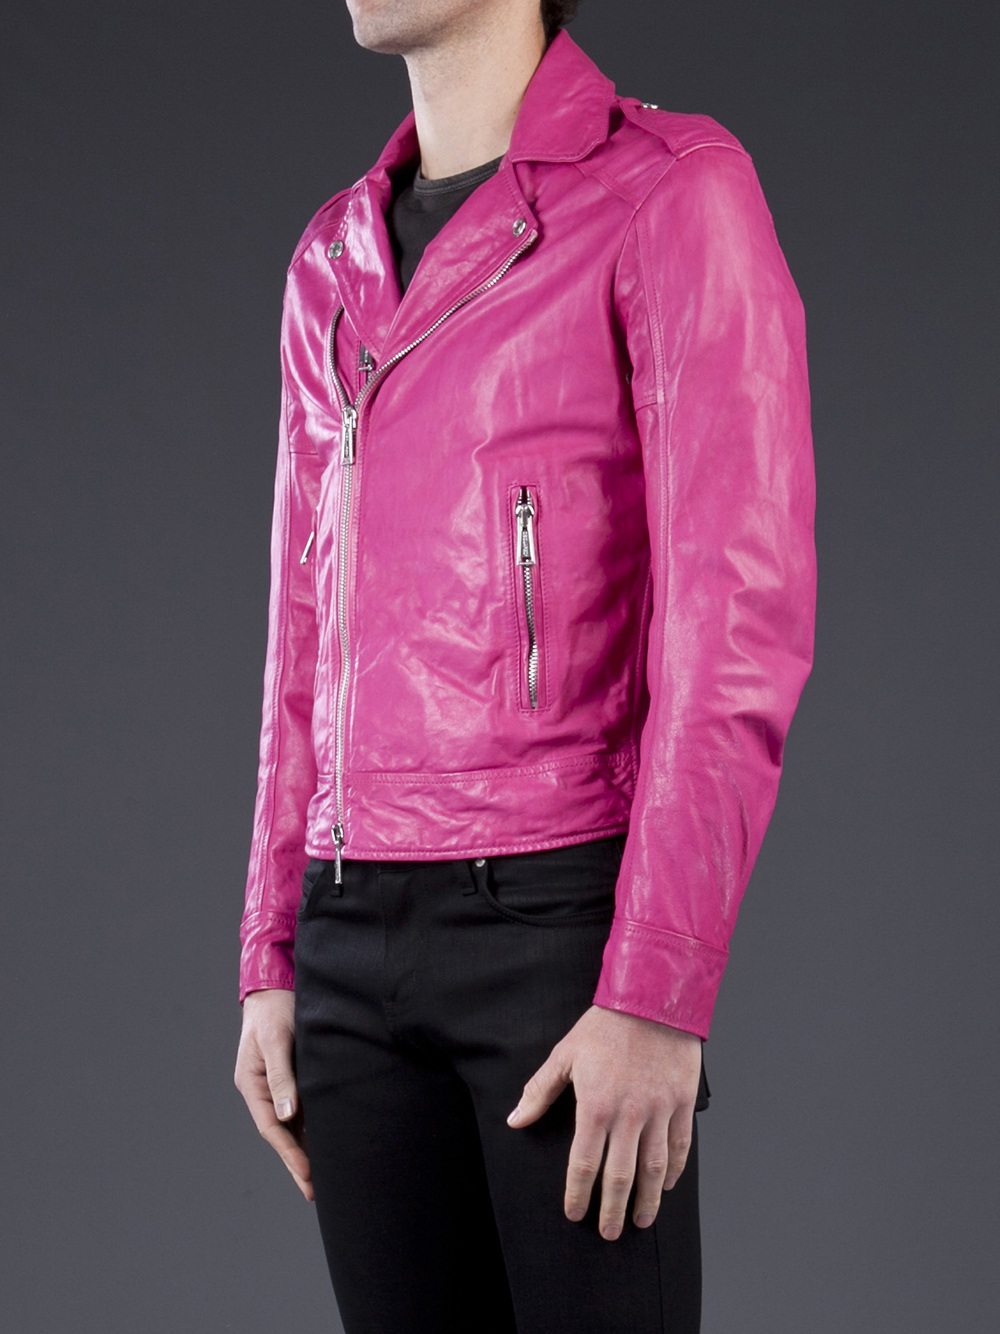 Lyst - Dsquared² Motorcycle Jacket in Pink for Men